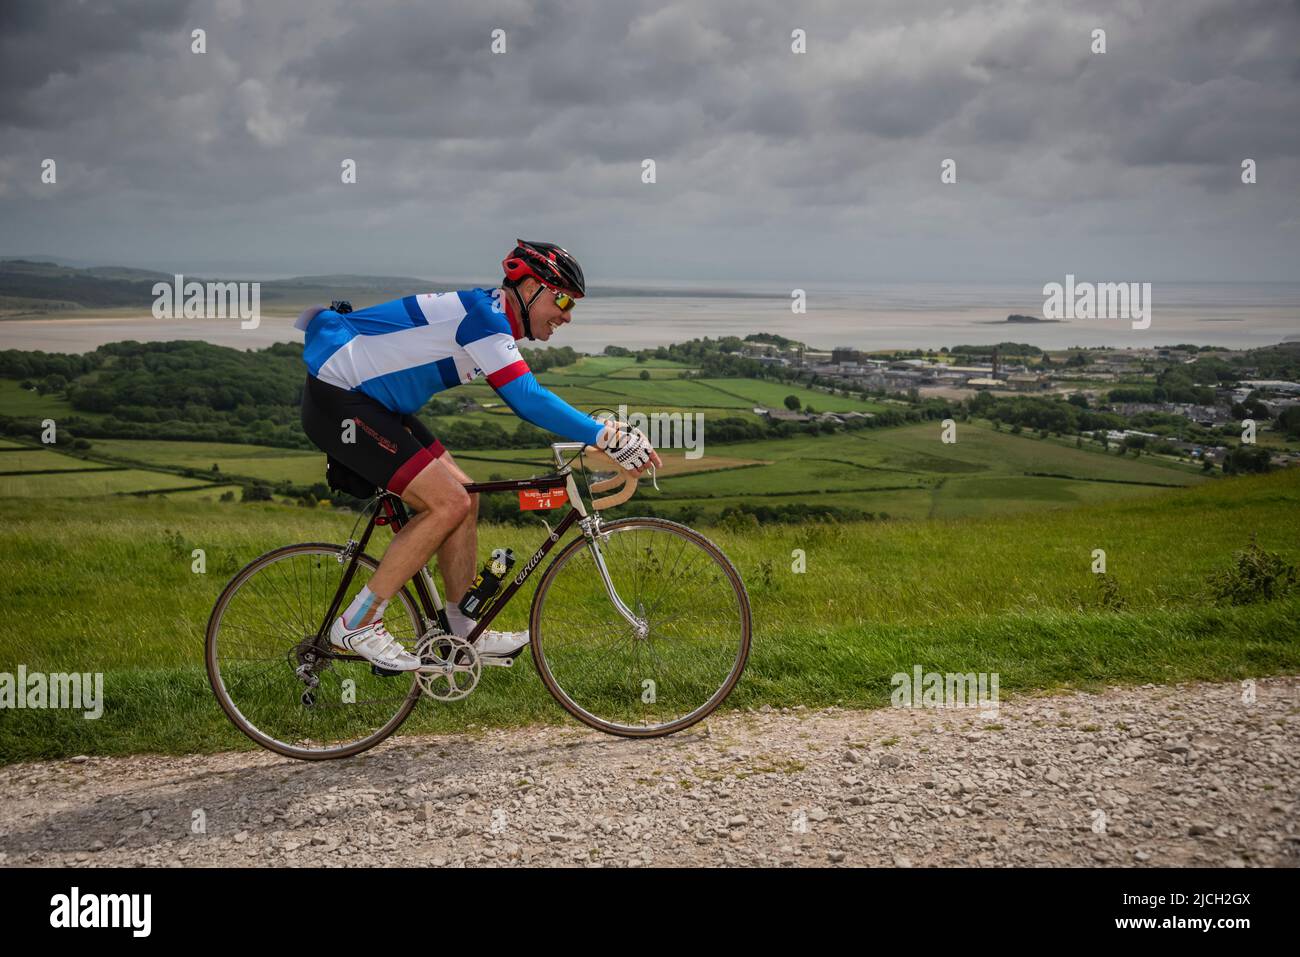 A male cyclist in the Veloretro vintage cycling event, Ulverston, Cumbria, UK. Stock Photo